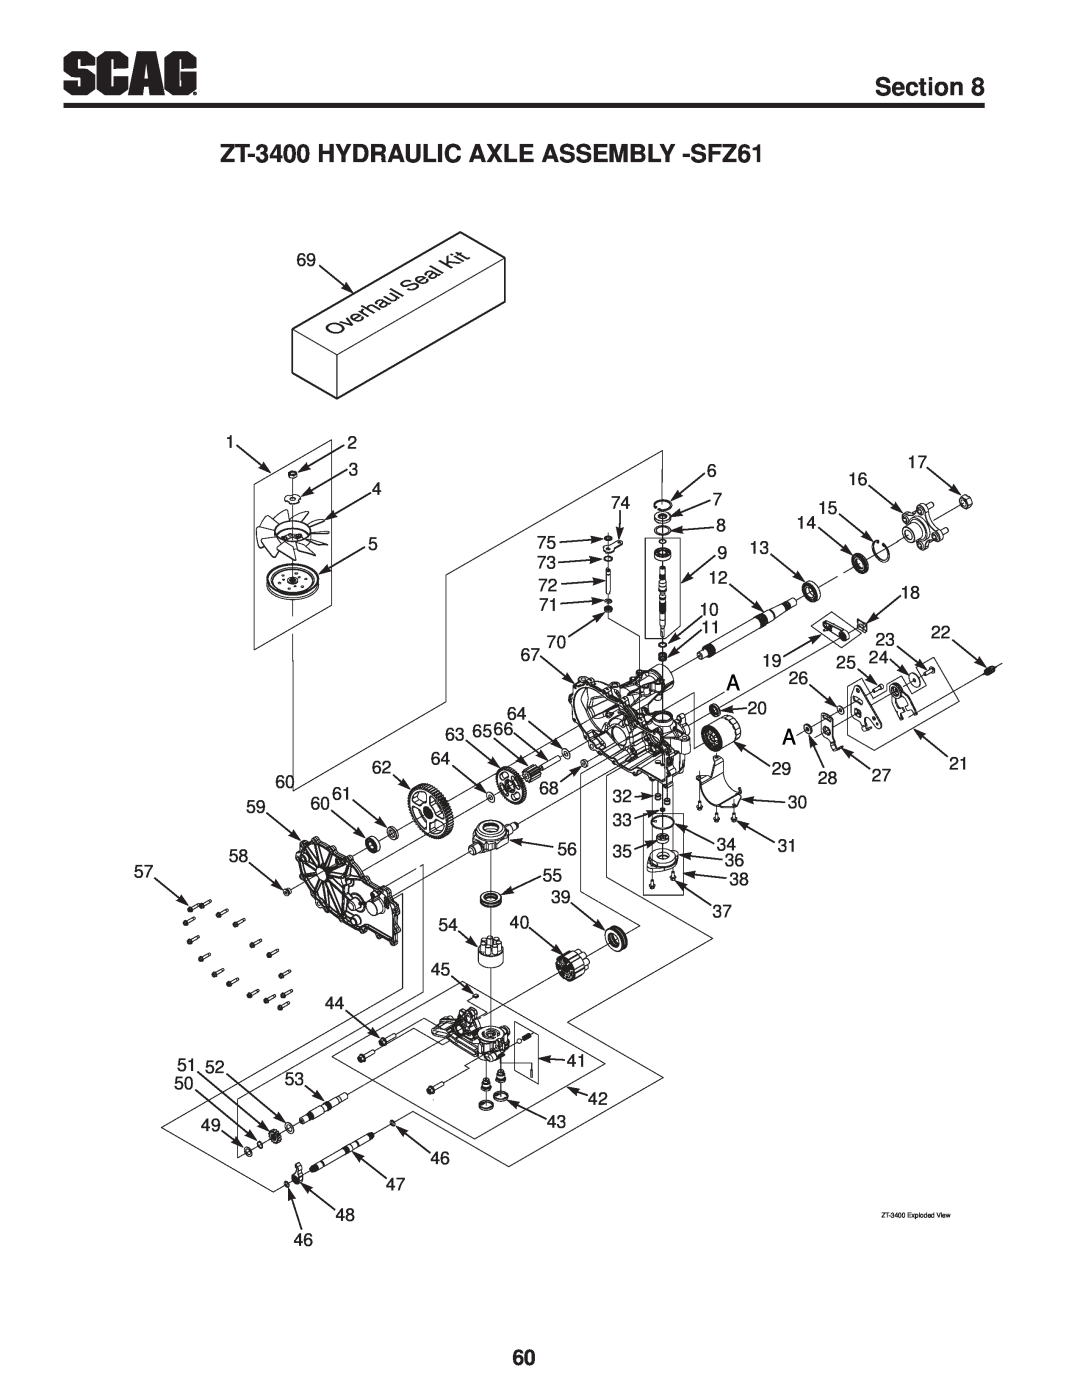 Scag Power Equipment SFZ61-28BS, SFZ36-20BS ZT-3400 HYDRAULIC AXLE ASSEMBLY -SFZ61, Section, 59 60, ZT-3400 Exploded View 